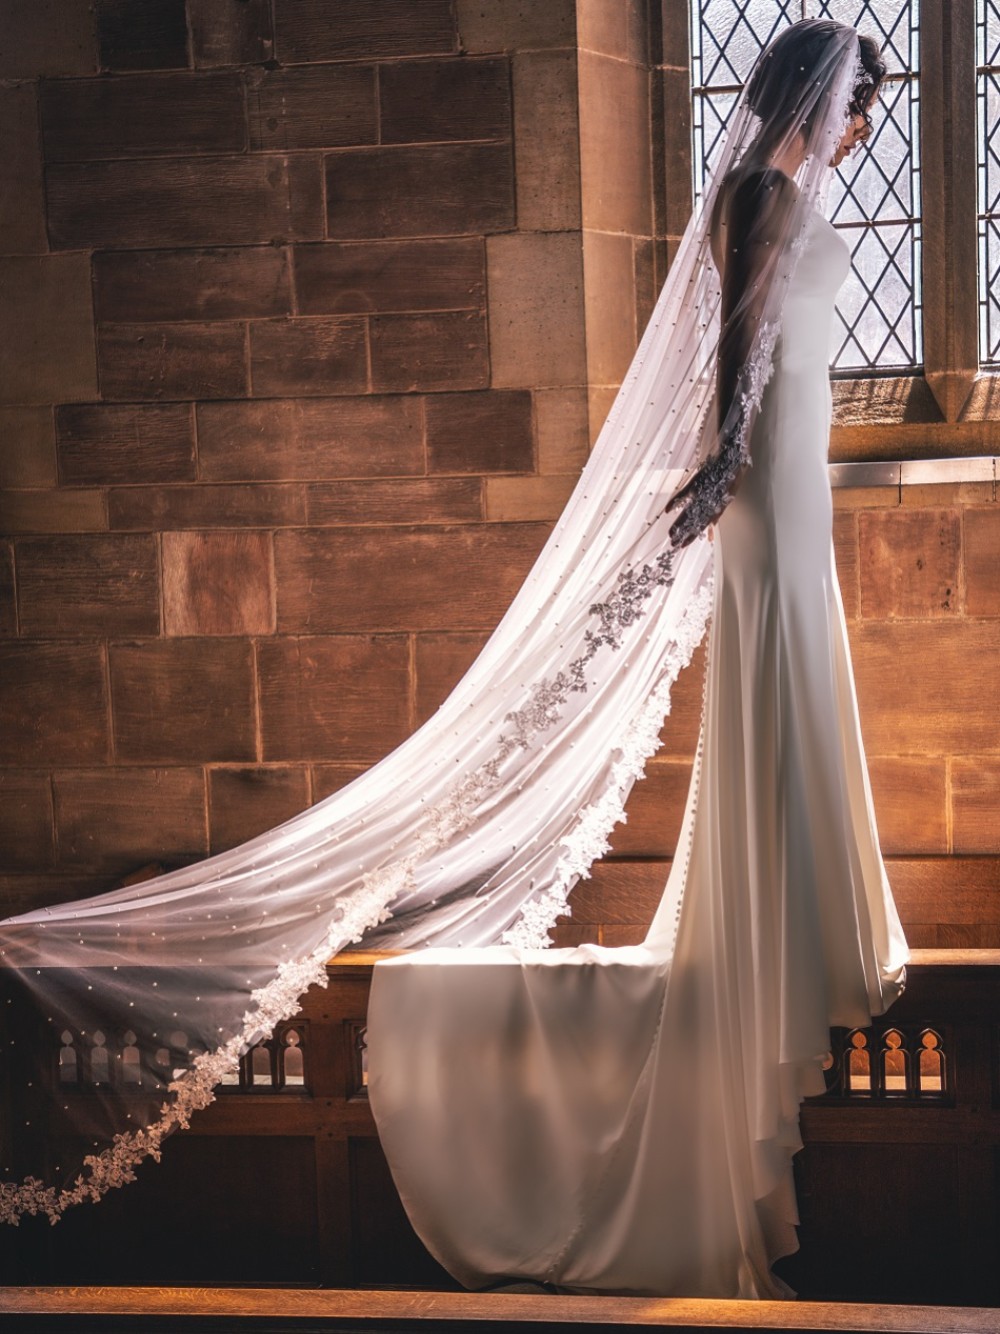 Photograph: Perfect Bridal Ivory Single Tier Pearl Embellished Veil with Floral Lace Edge